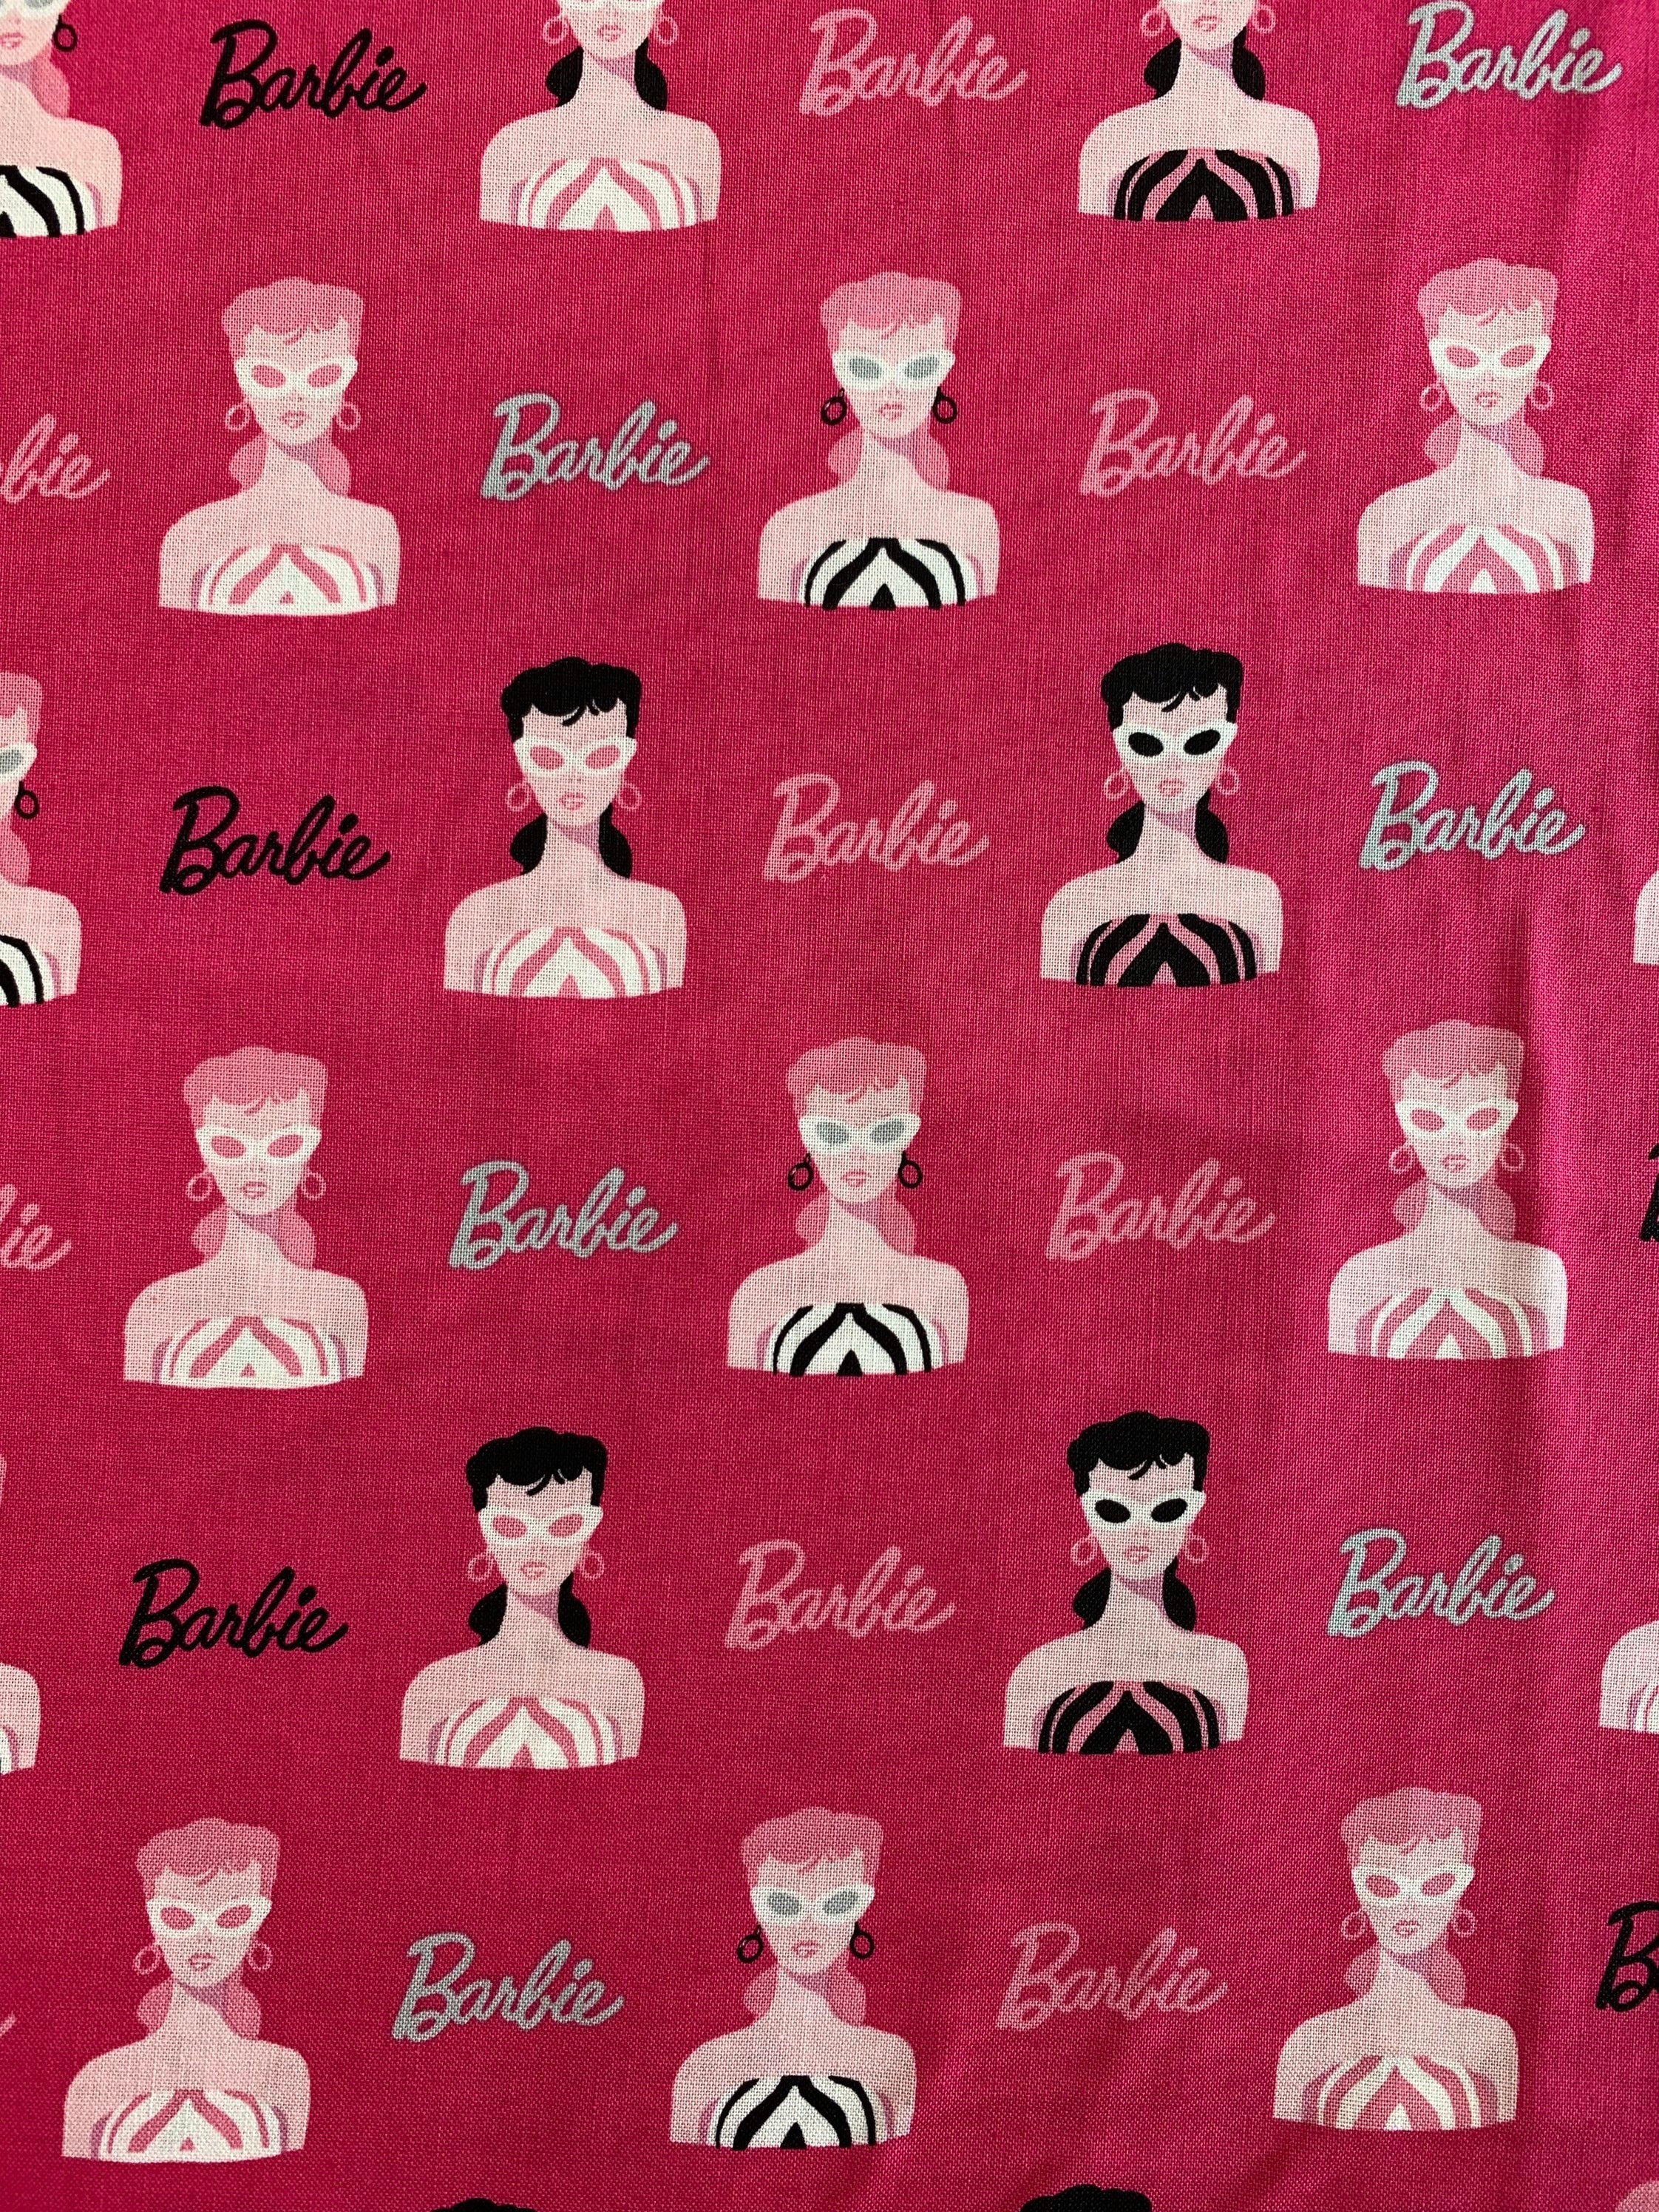 Classic Barbie - White -- Pink or Black background. Licensed Fabric by the  yard